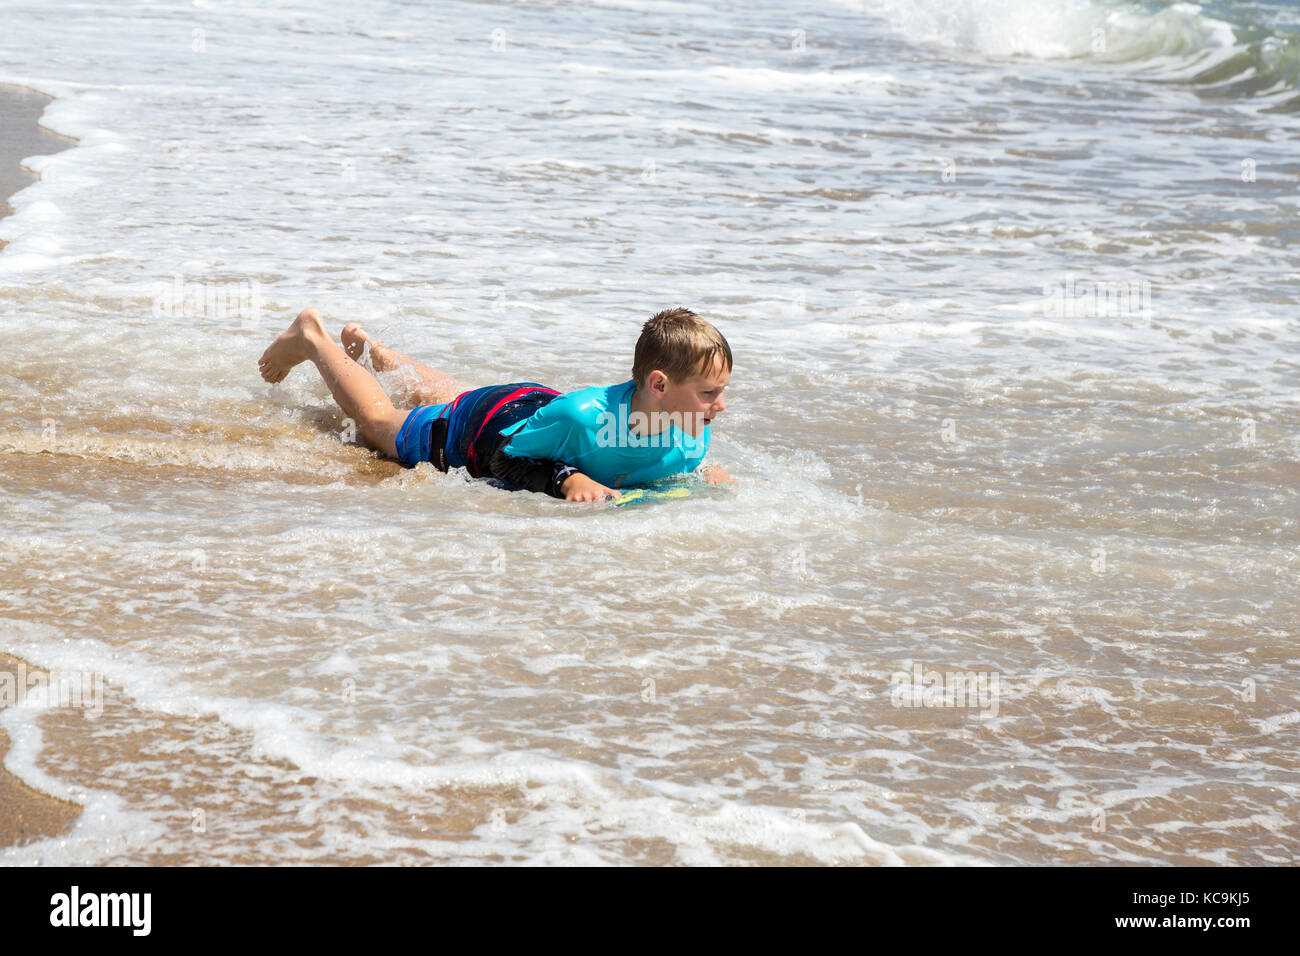 Avon, Outer Banks, North Carolina, USA.  Kids in the Surf.  Young Boy on the Beach with his Boogie Board. Stock Photo